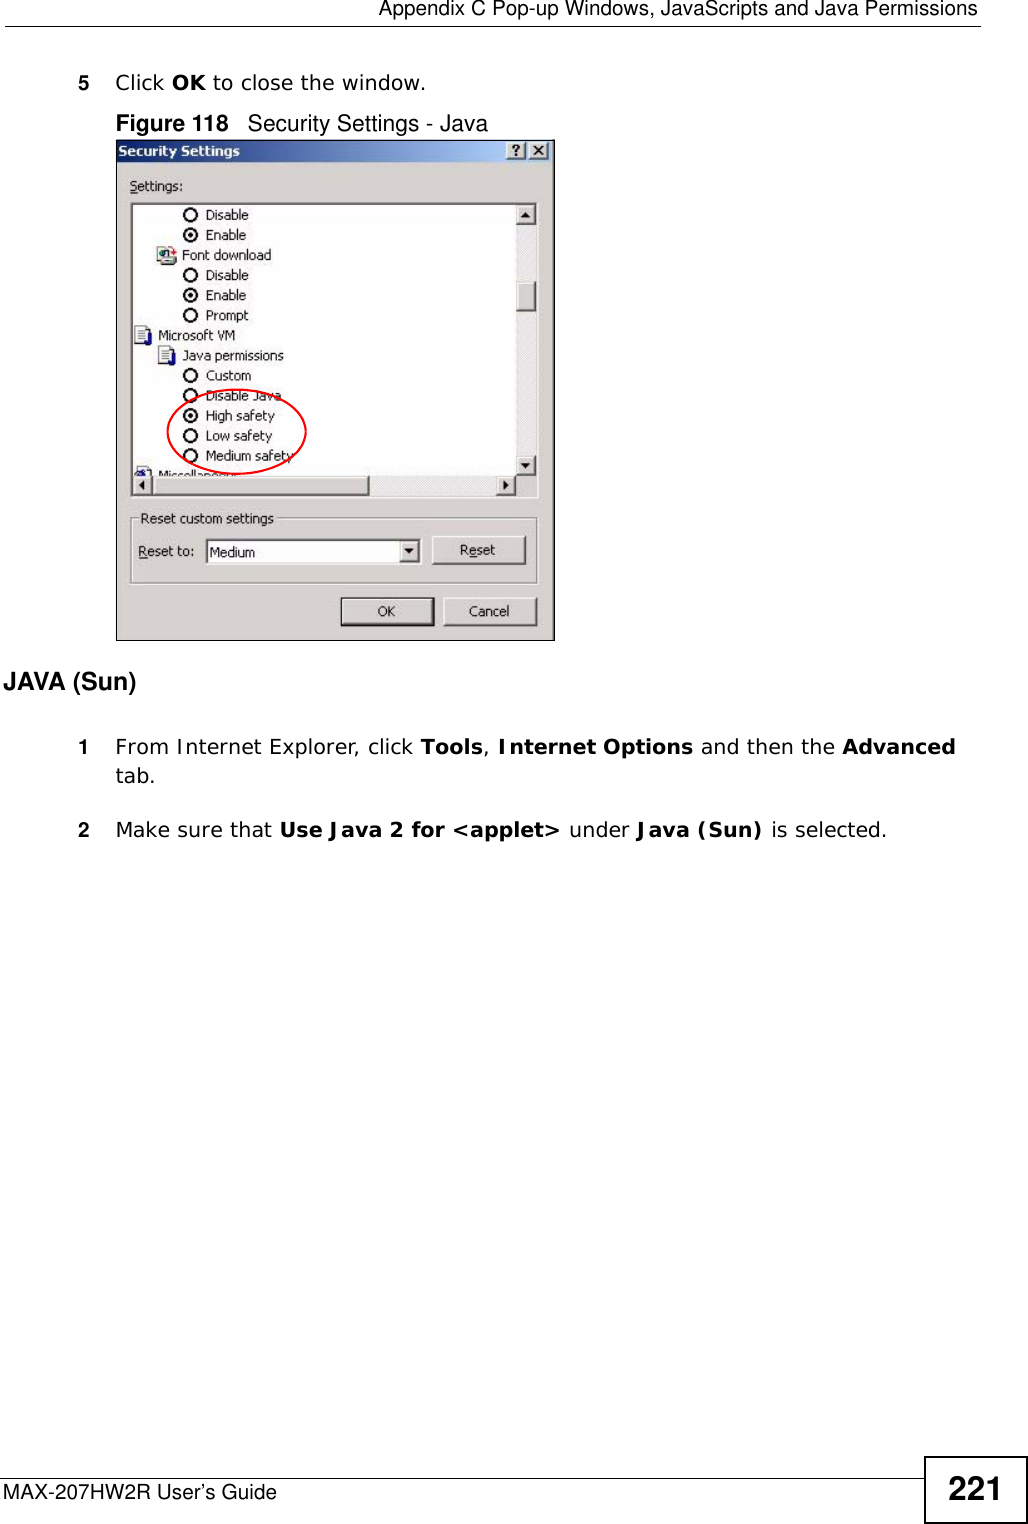  Appendix C Pop-up Windows, JavaScripts and Java PermissionsMAX-207HW2R User’s Guide 2215Click OK to close the window.Figure 118   Security Settings - Java JAVA (Sun)1From Internet Explorer, click Tools, Internet Options and then the Advanced tab. 2Make sure that Use Java 2 for &lt;applet&gt; under Java (Sun) is selected.